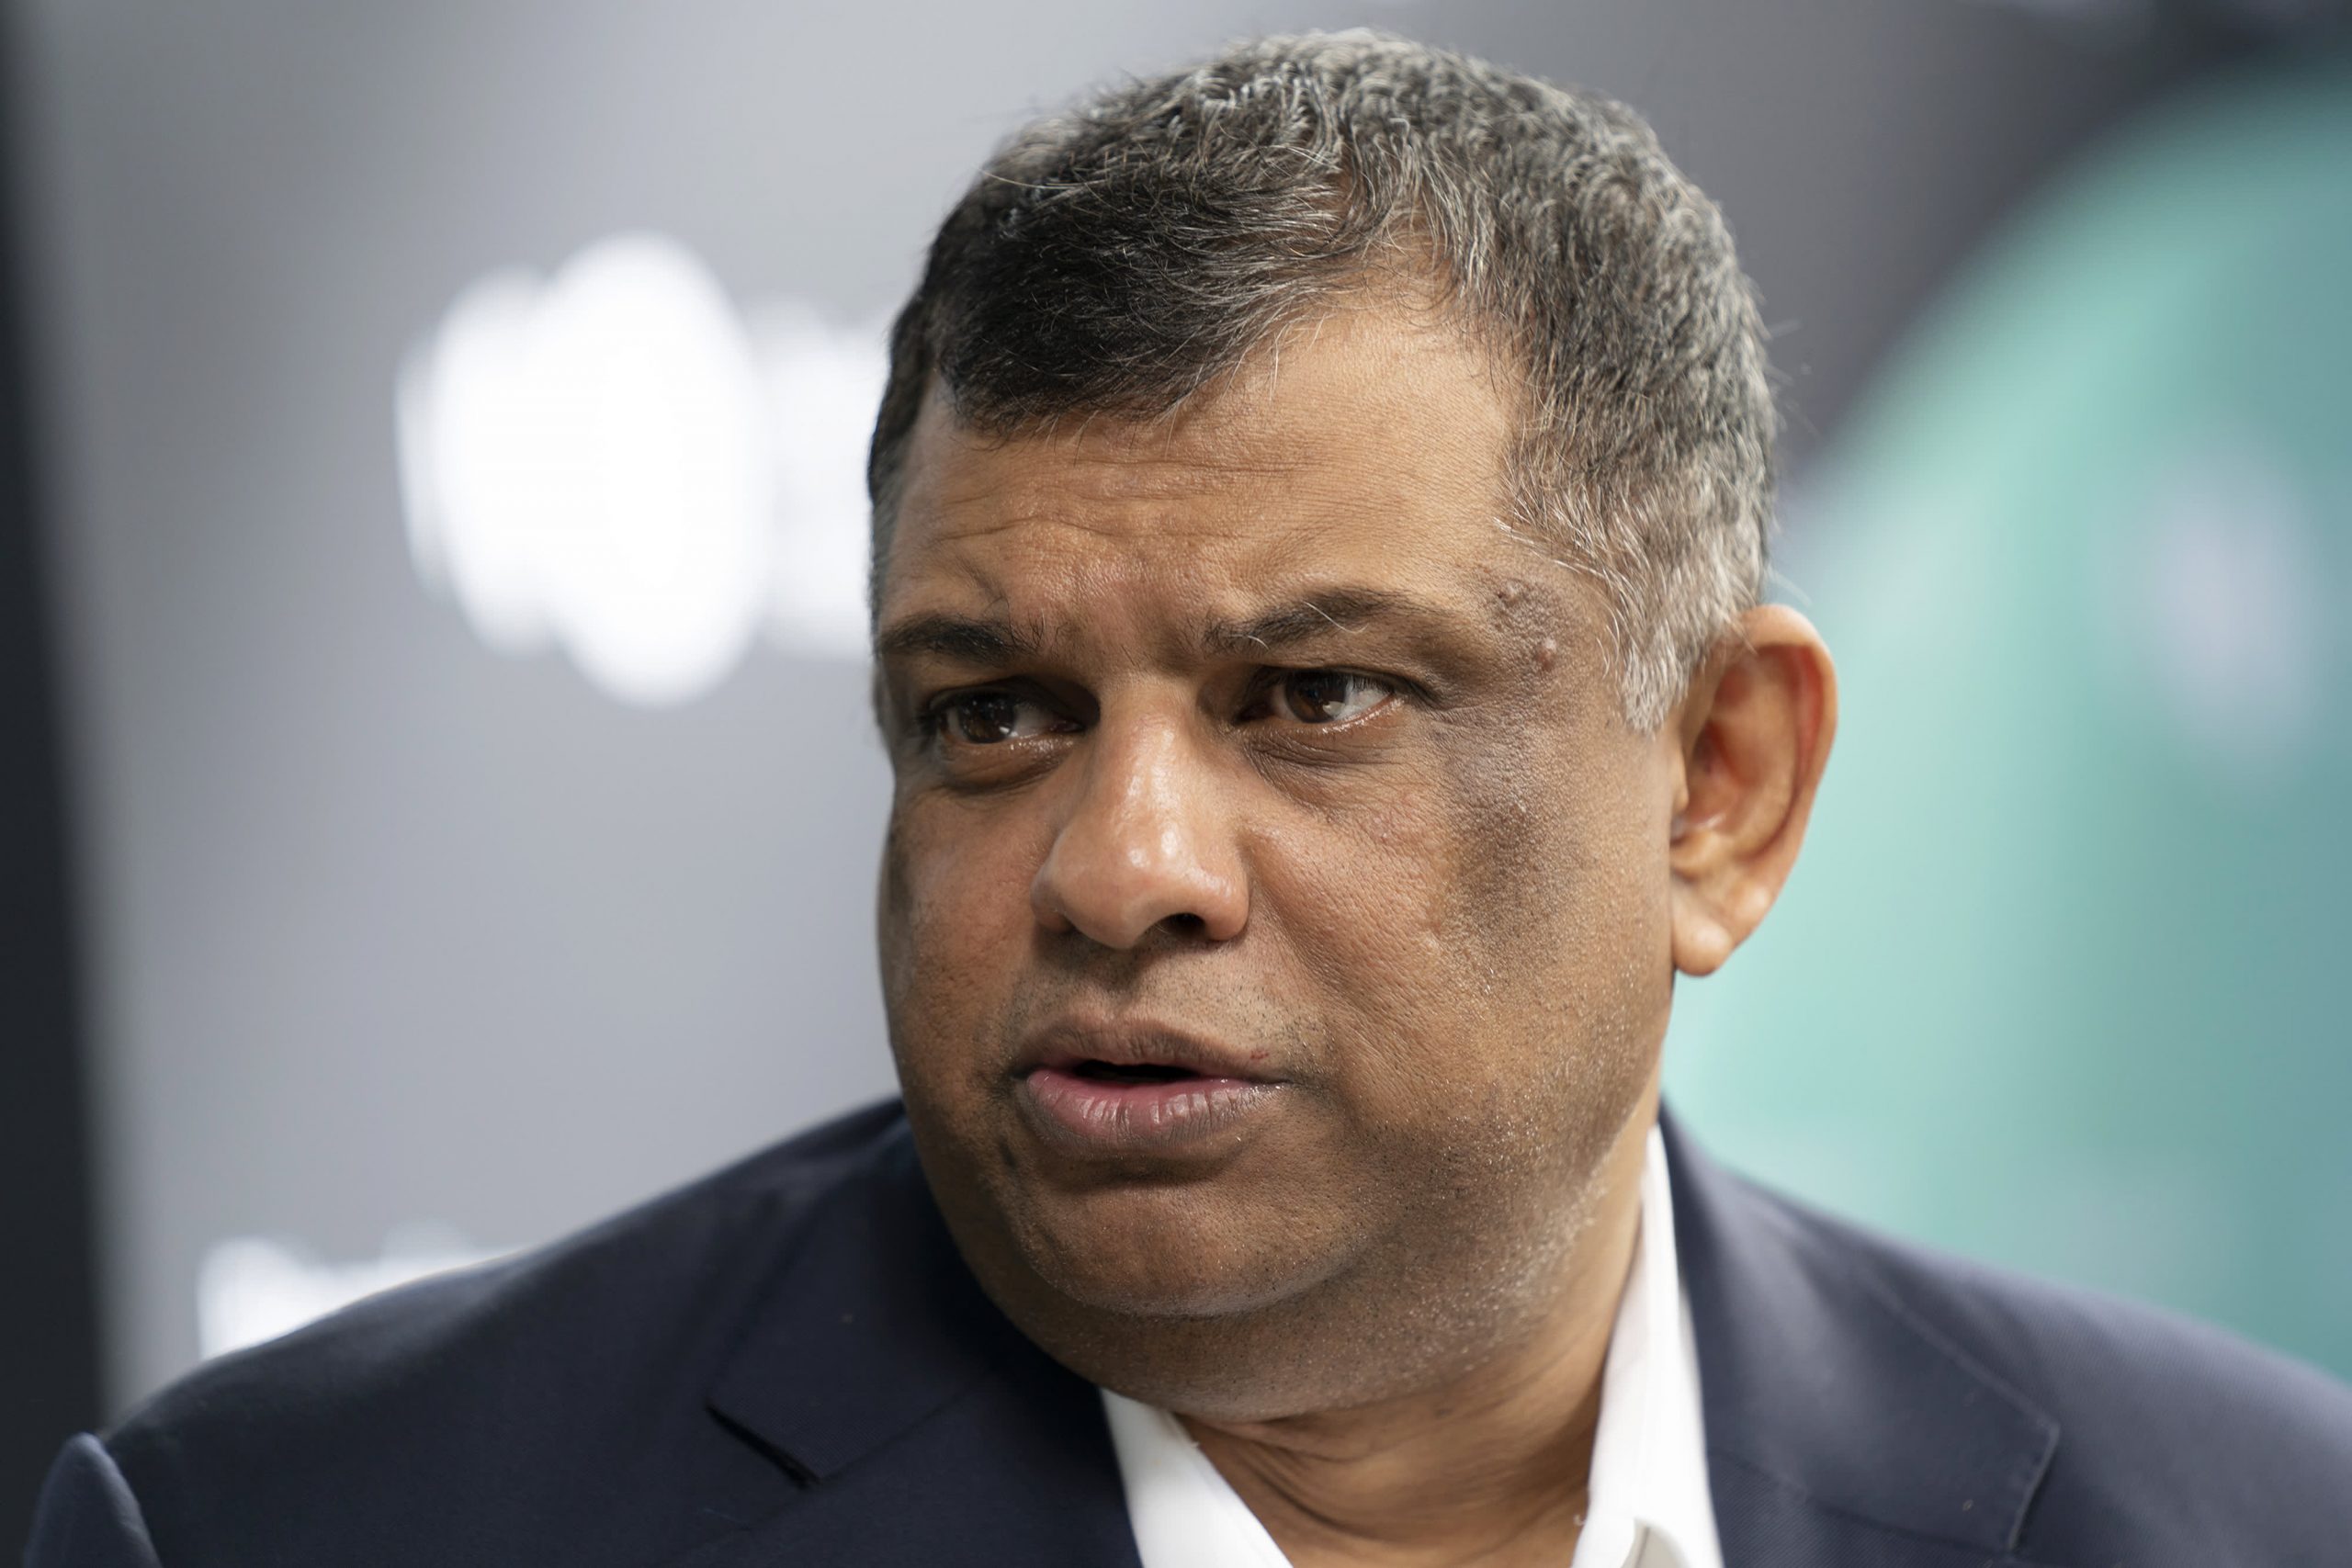 AirAsia CEO Tony Fernandes on aviation trade outlook